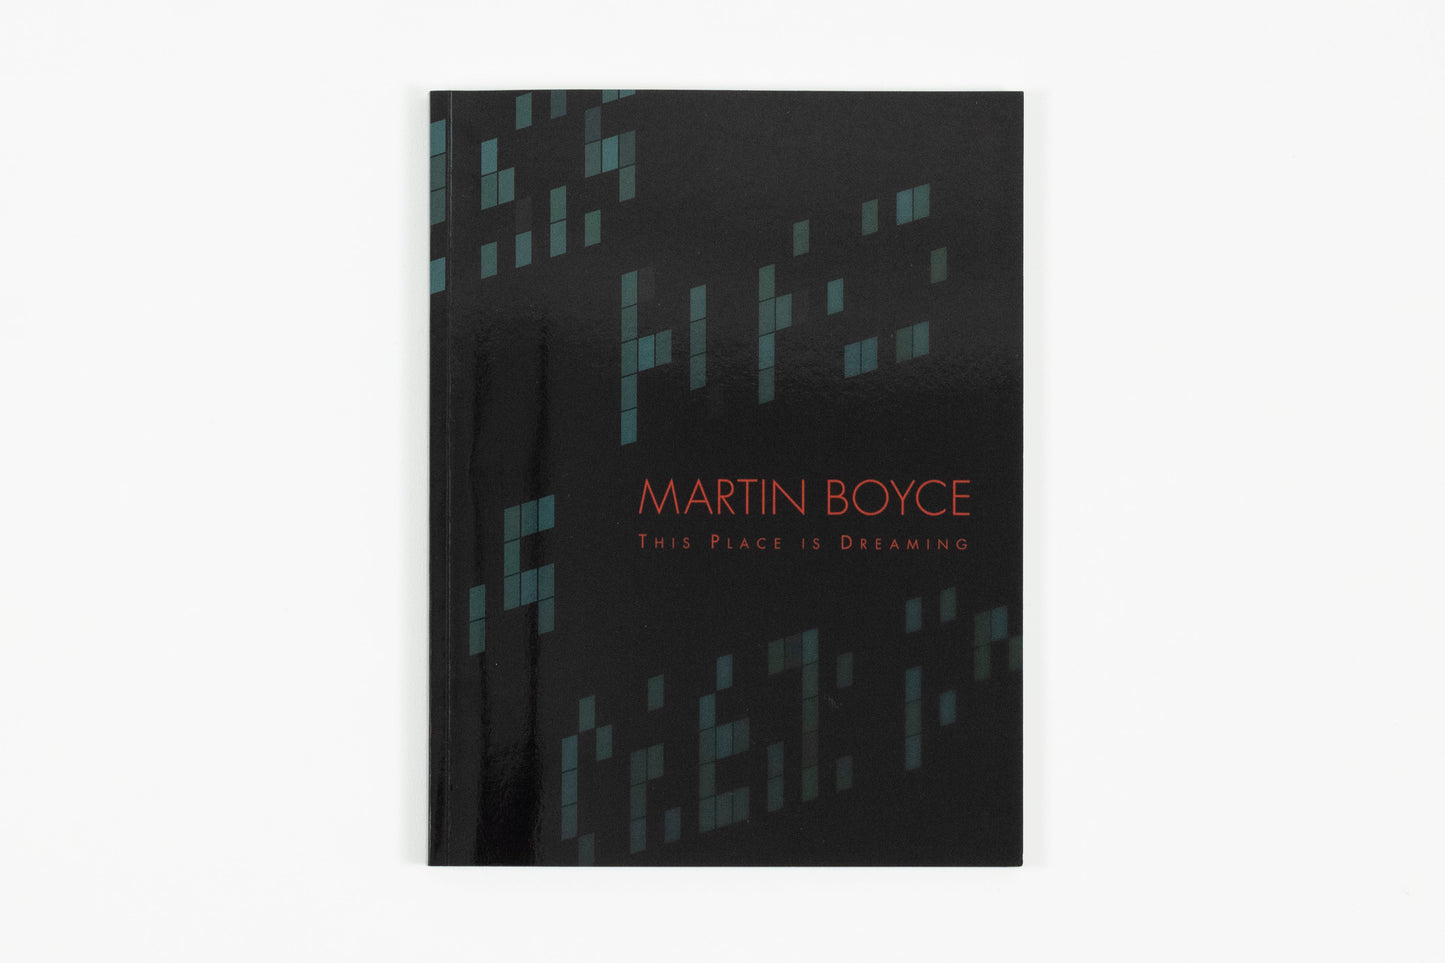 Martin Boyce - This Place is Dreaming